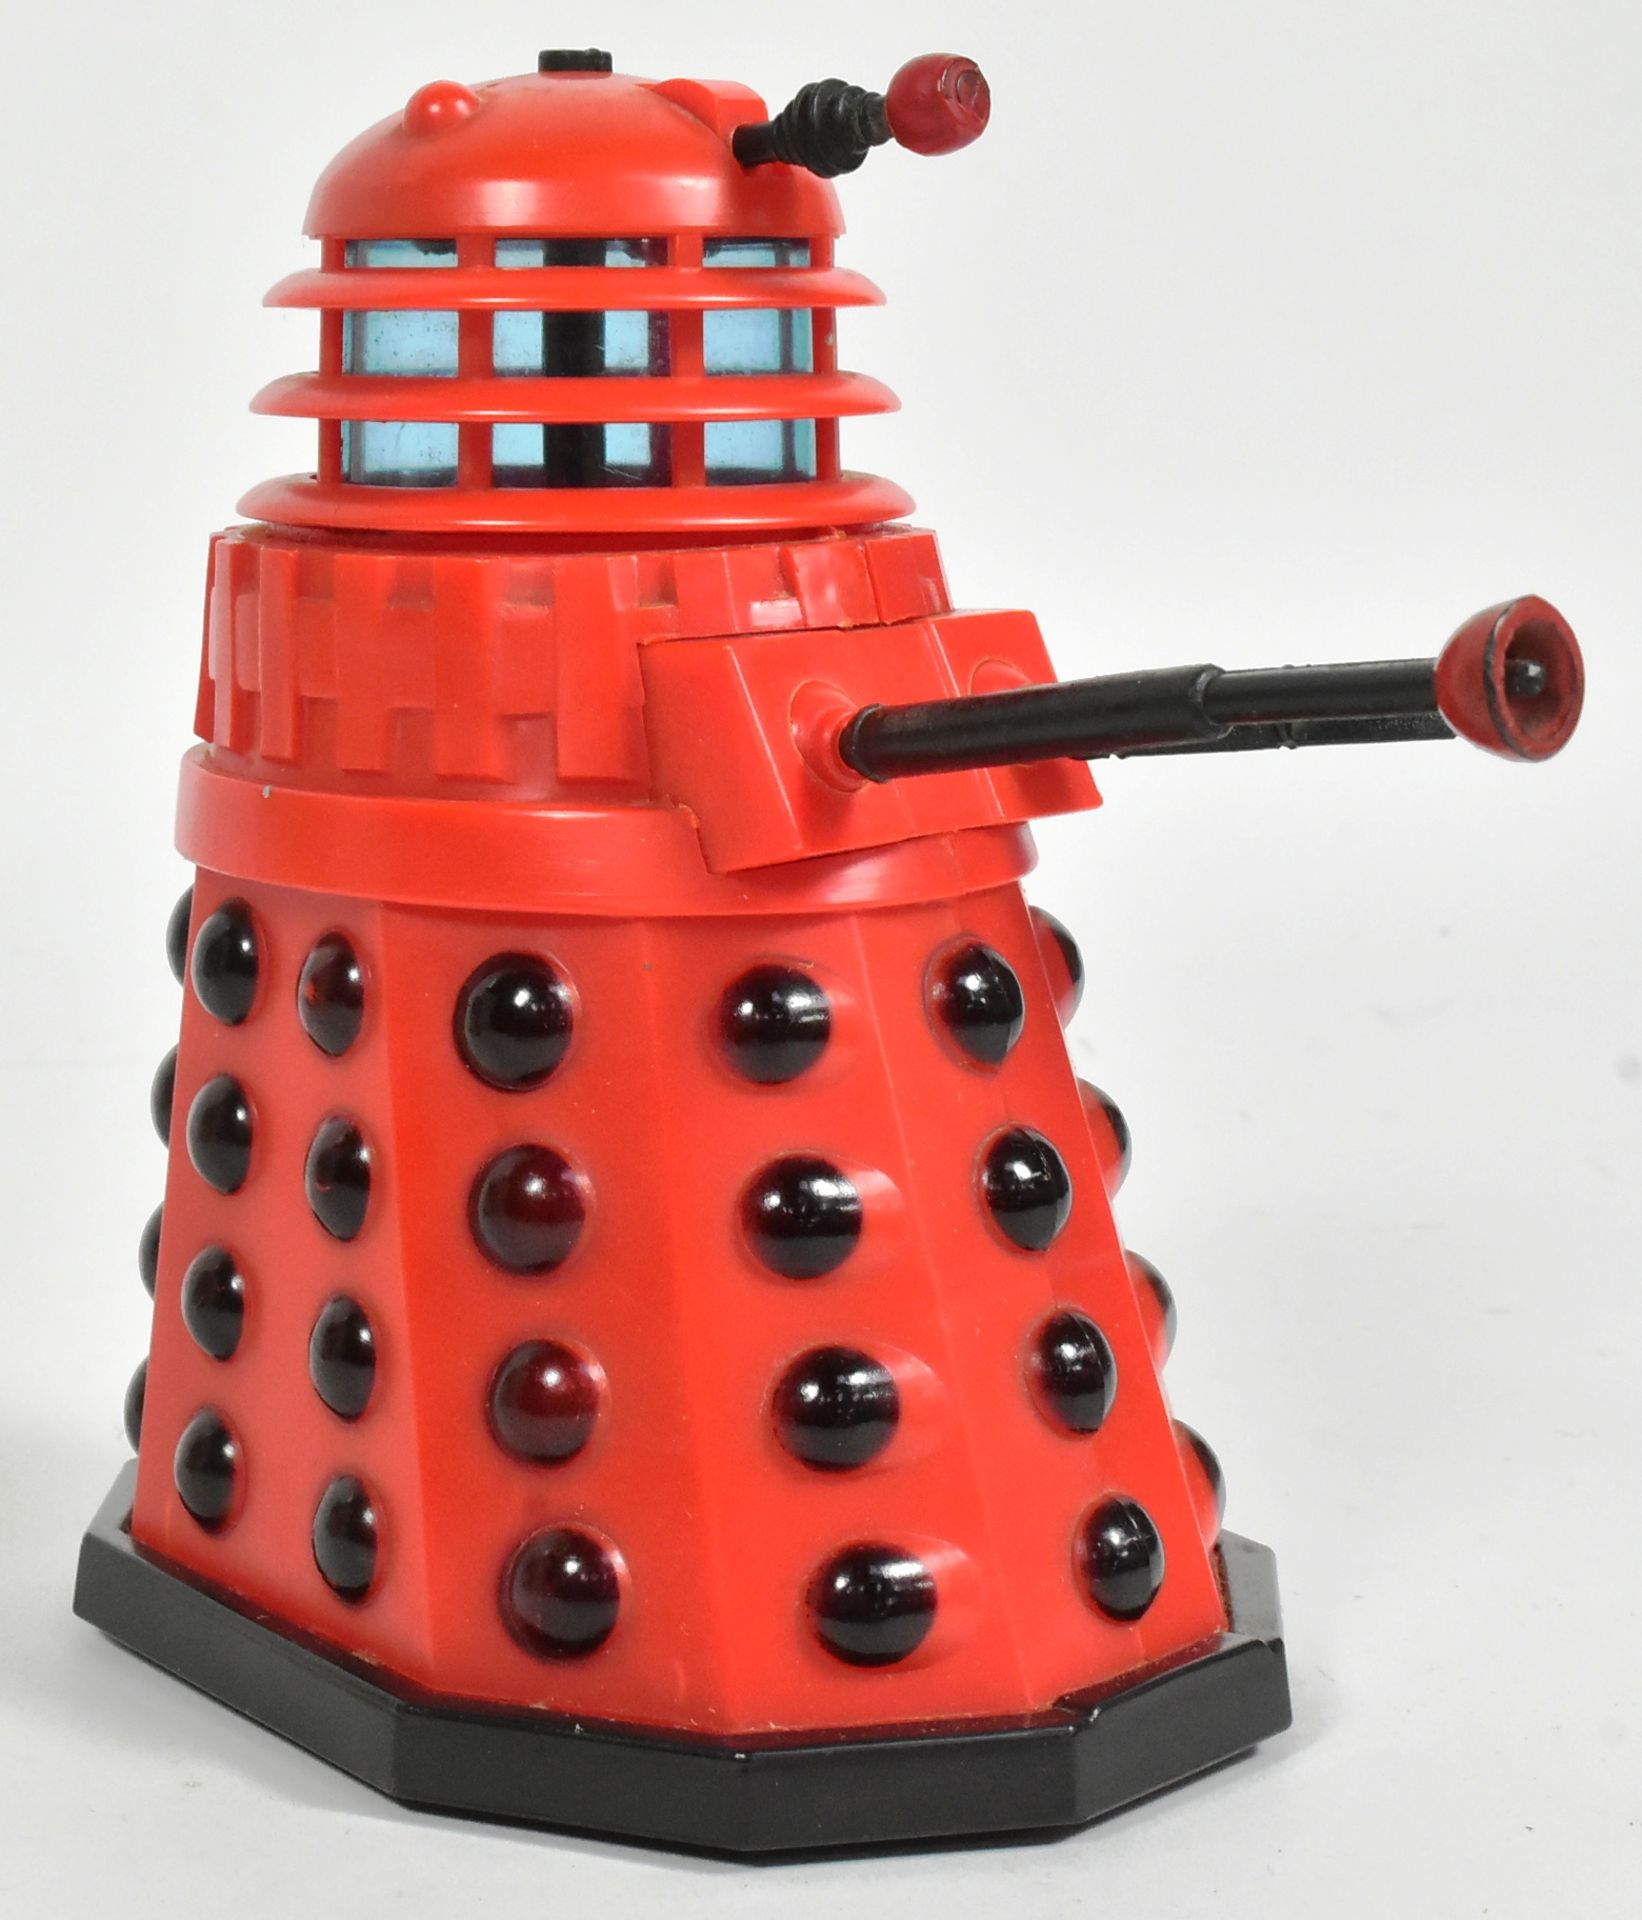 DOCTOR WHO - VINTAGE BBC TALKING DALEK TOY BY PALITOY - Image 3 of 6